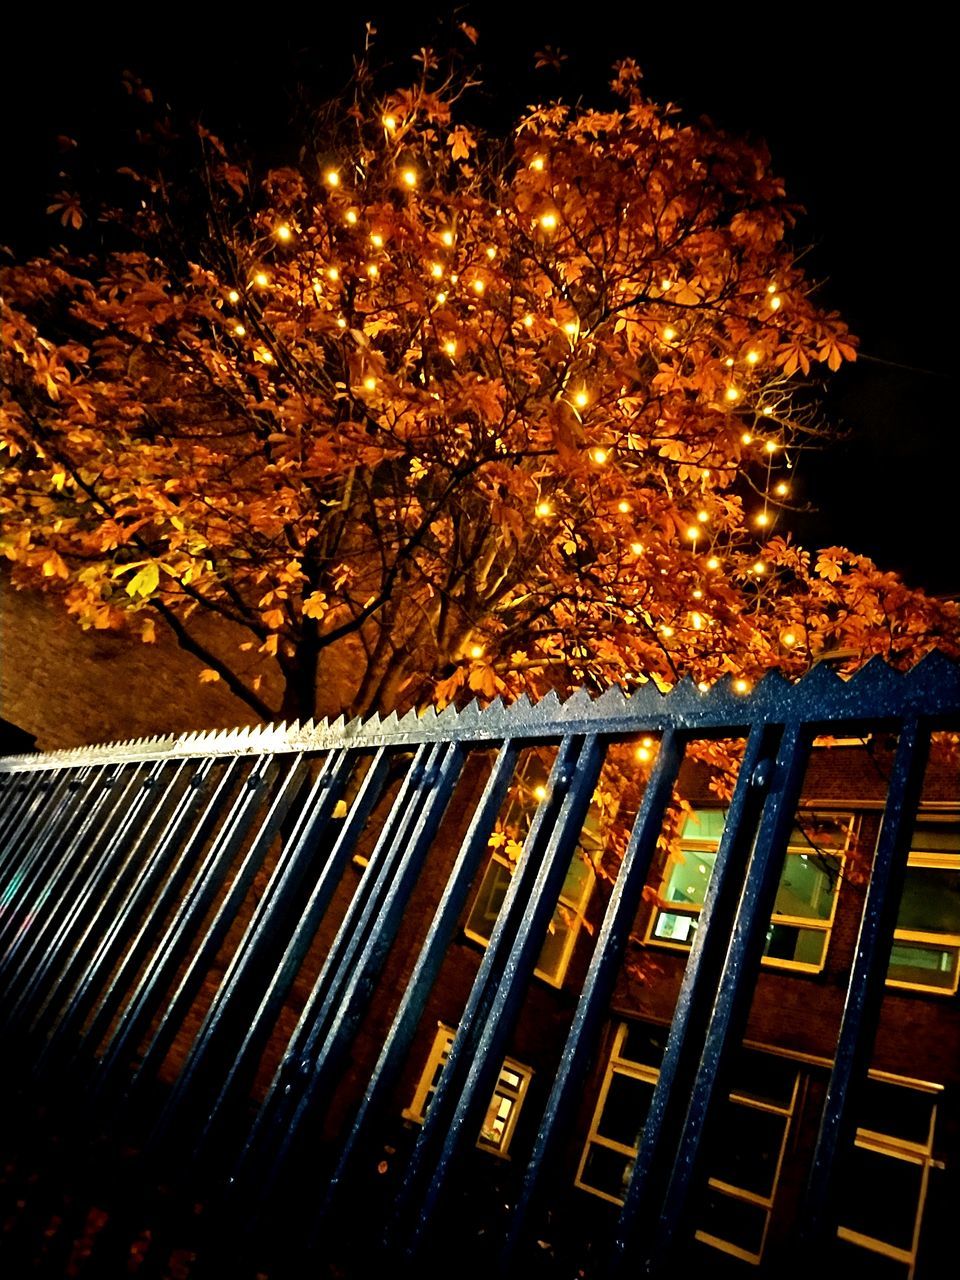 ILLUMINATED TREES BY FENCE DURING AUTUMN